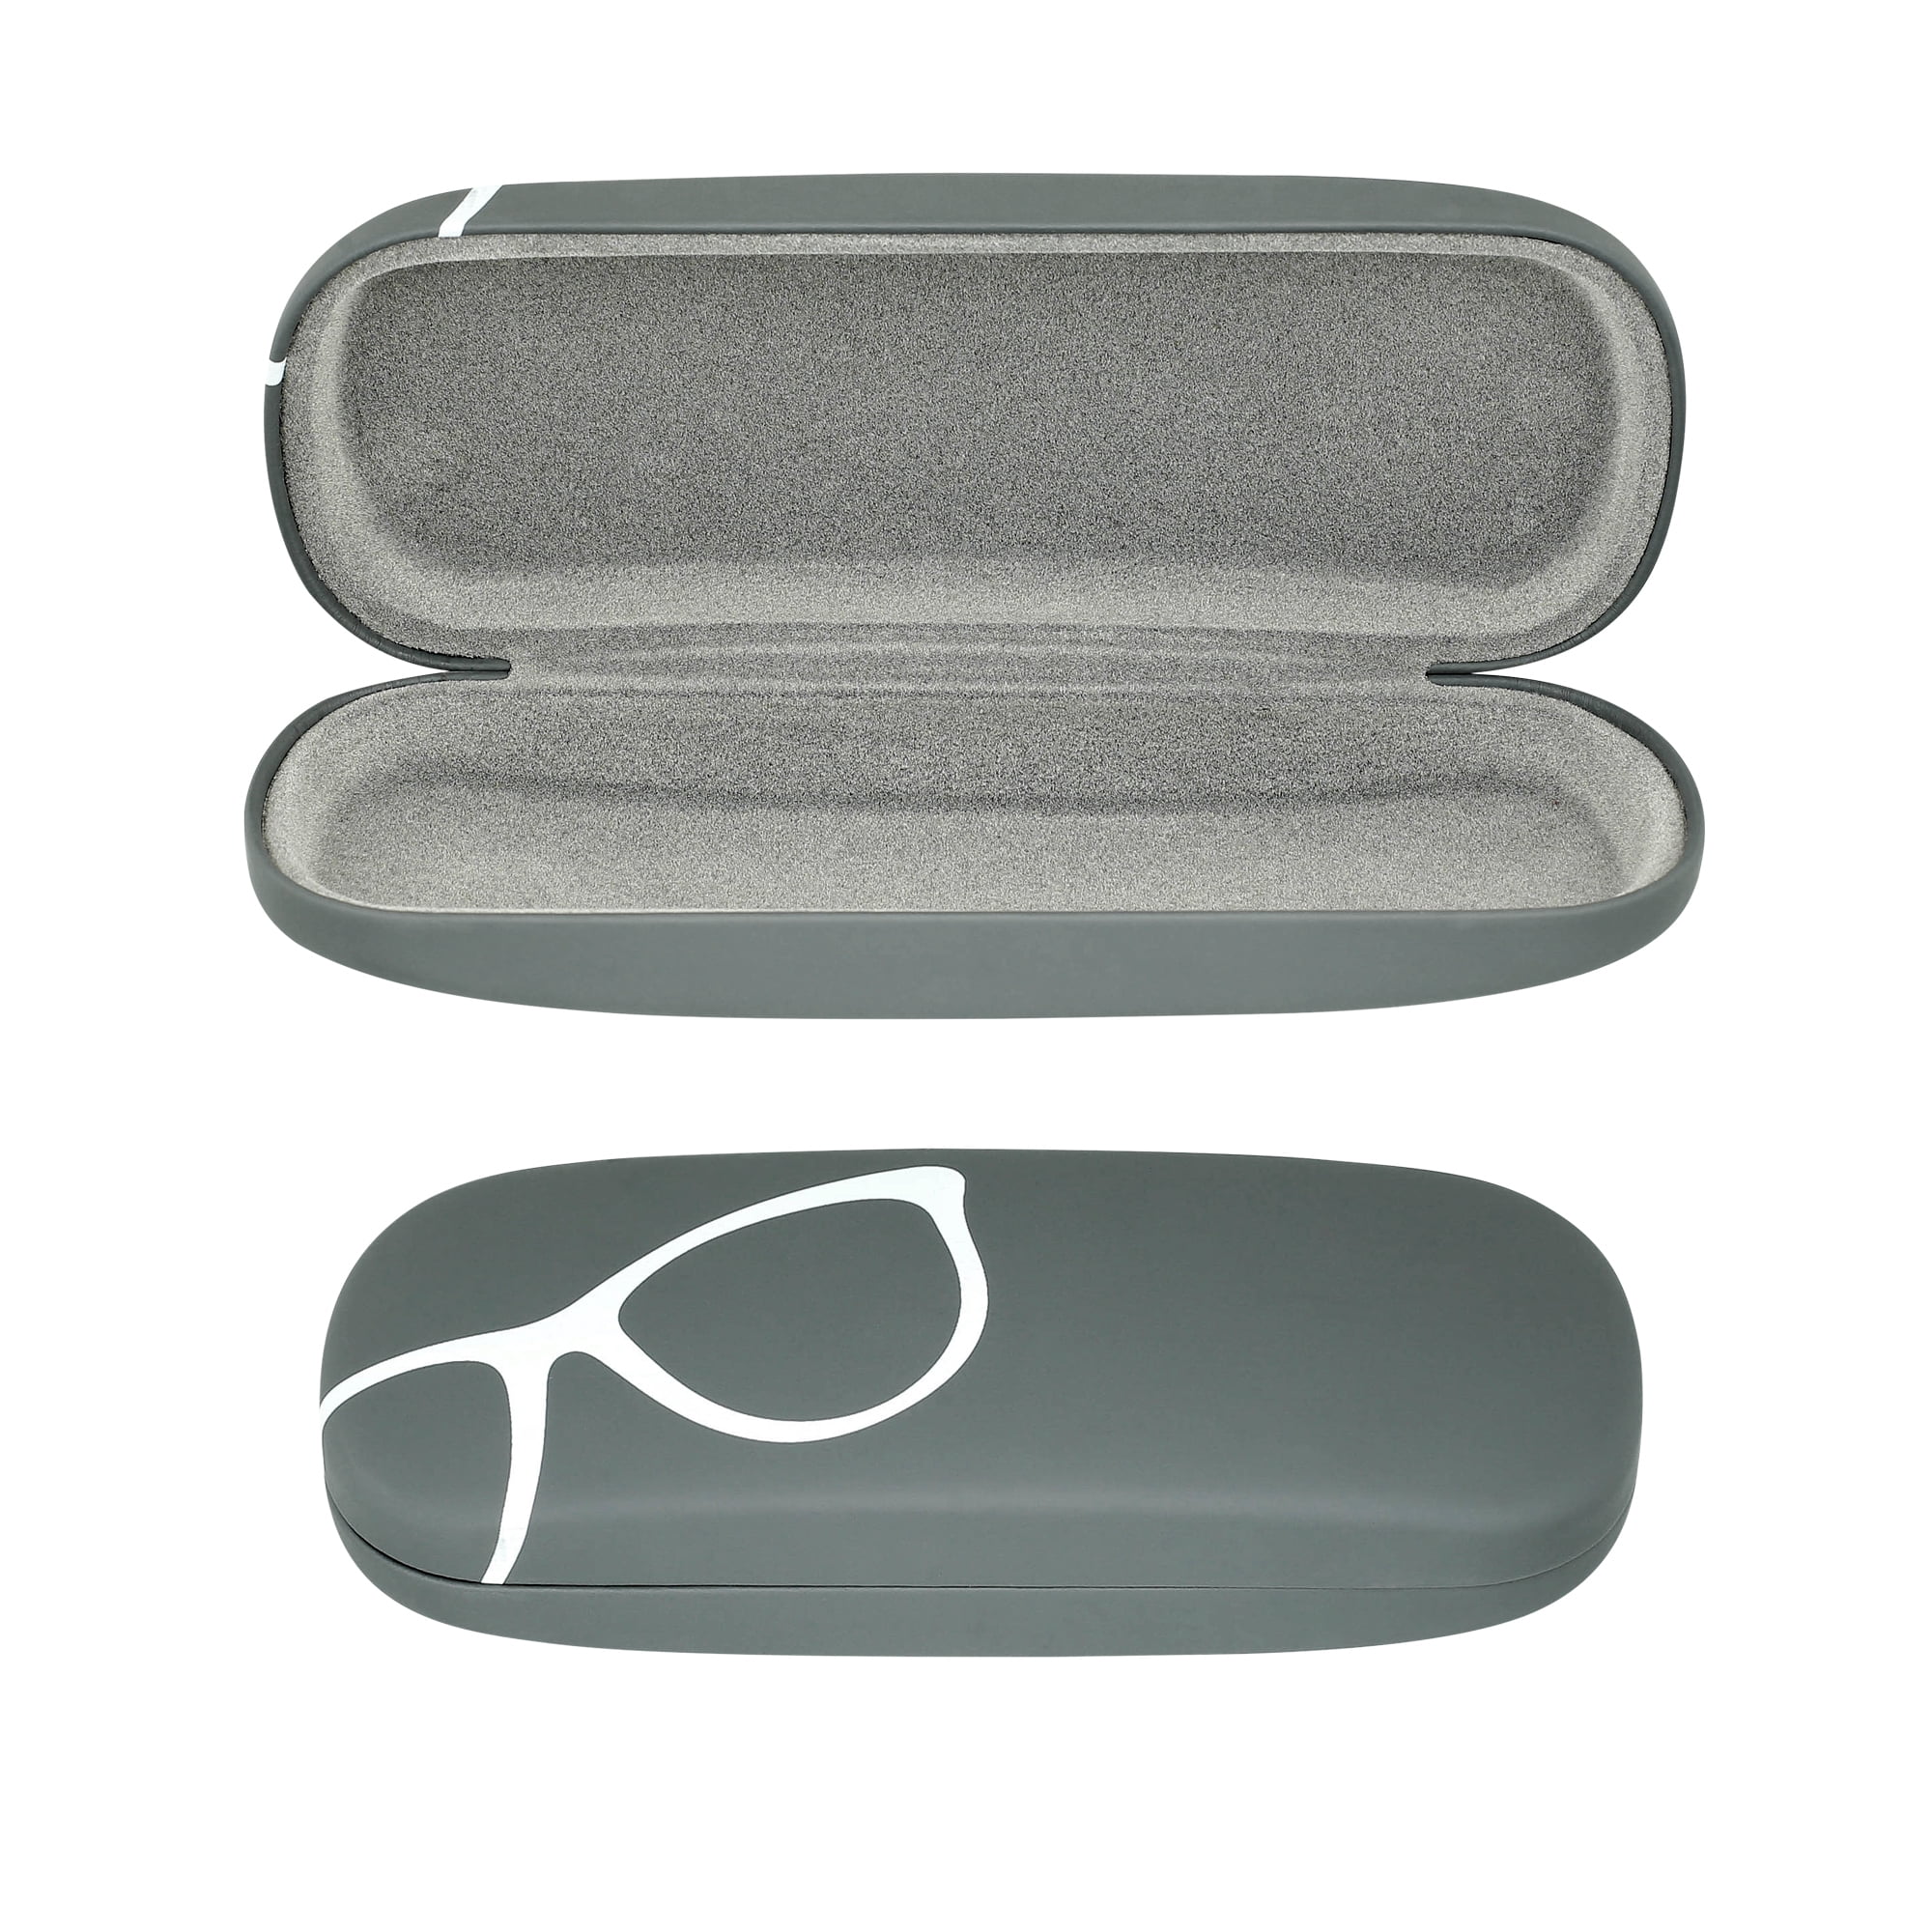 Bumpy Glasses Case With Colorful Waves Hard Shell Eyeglass Case For Men /& Women